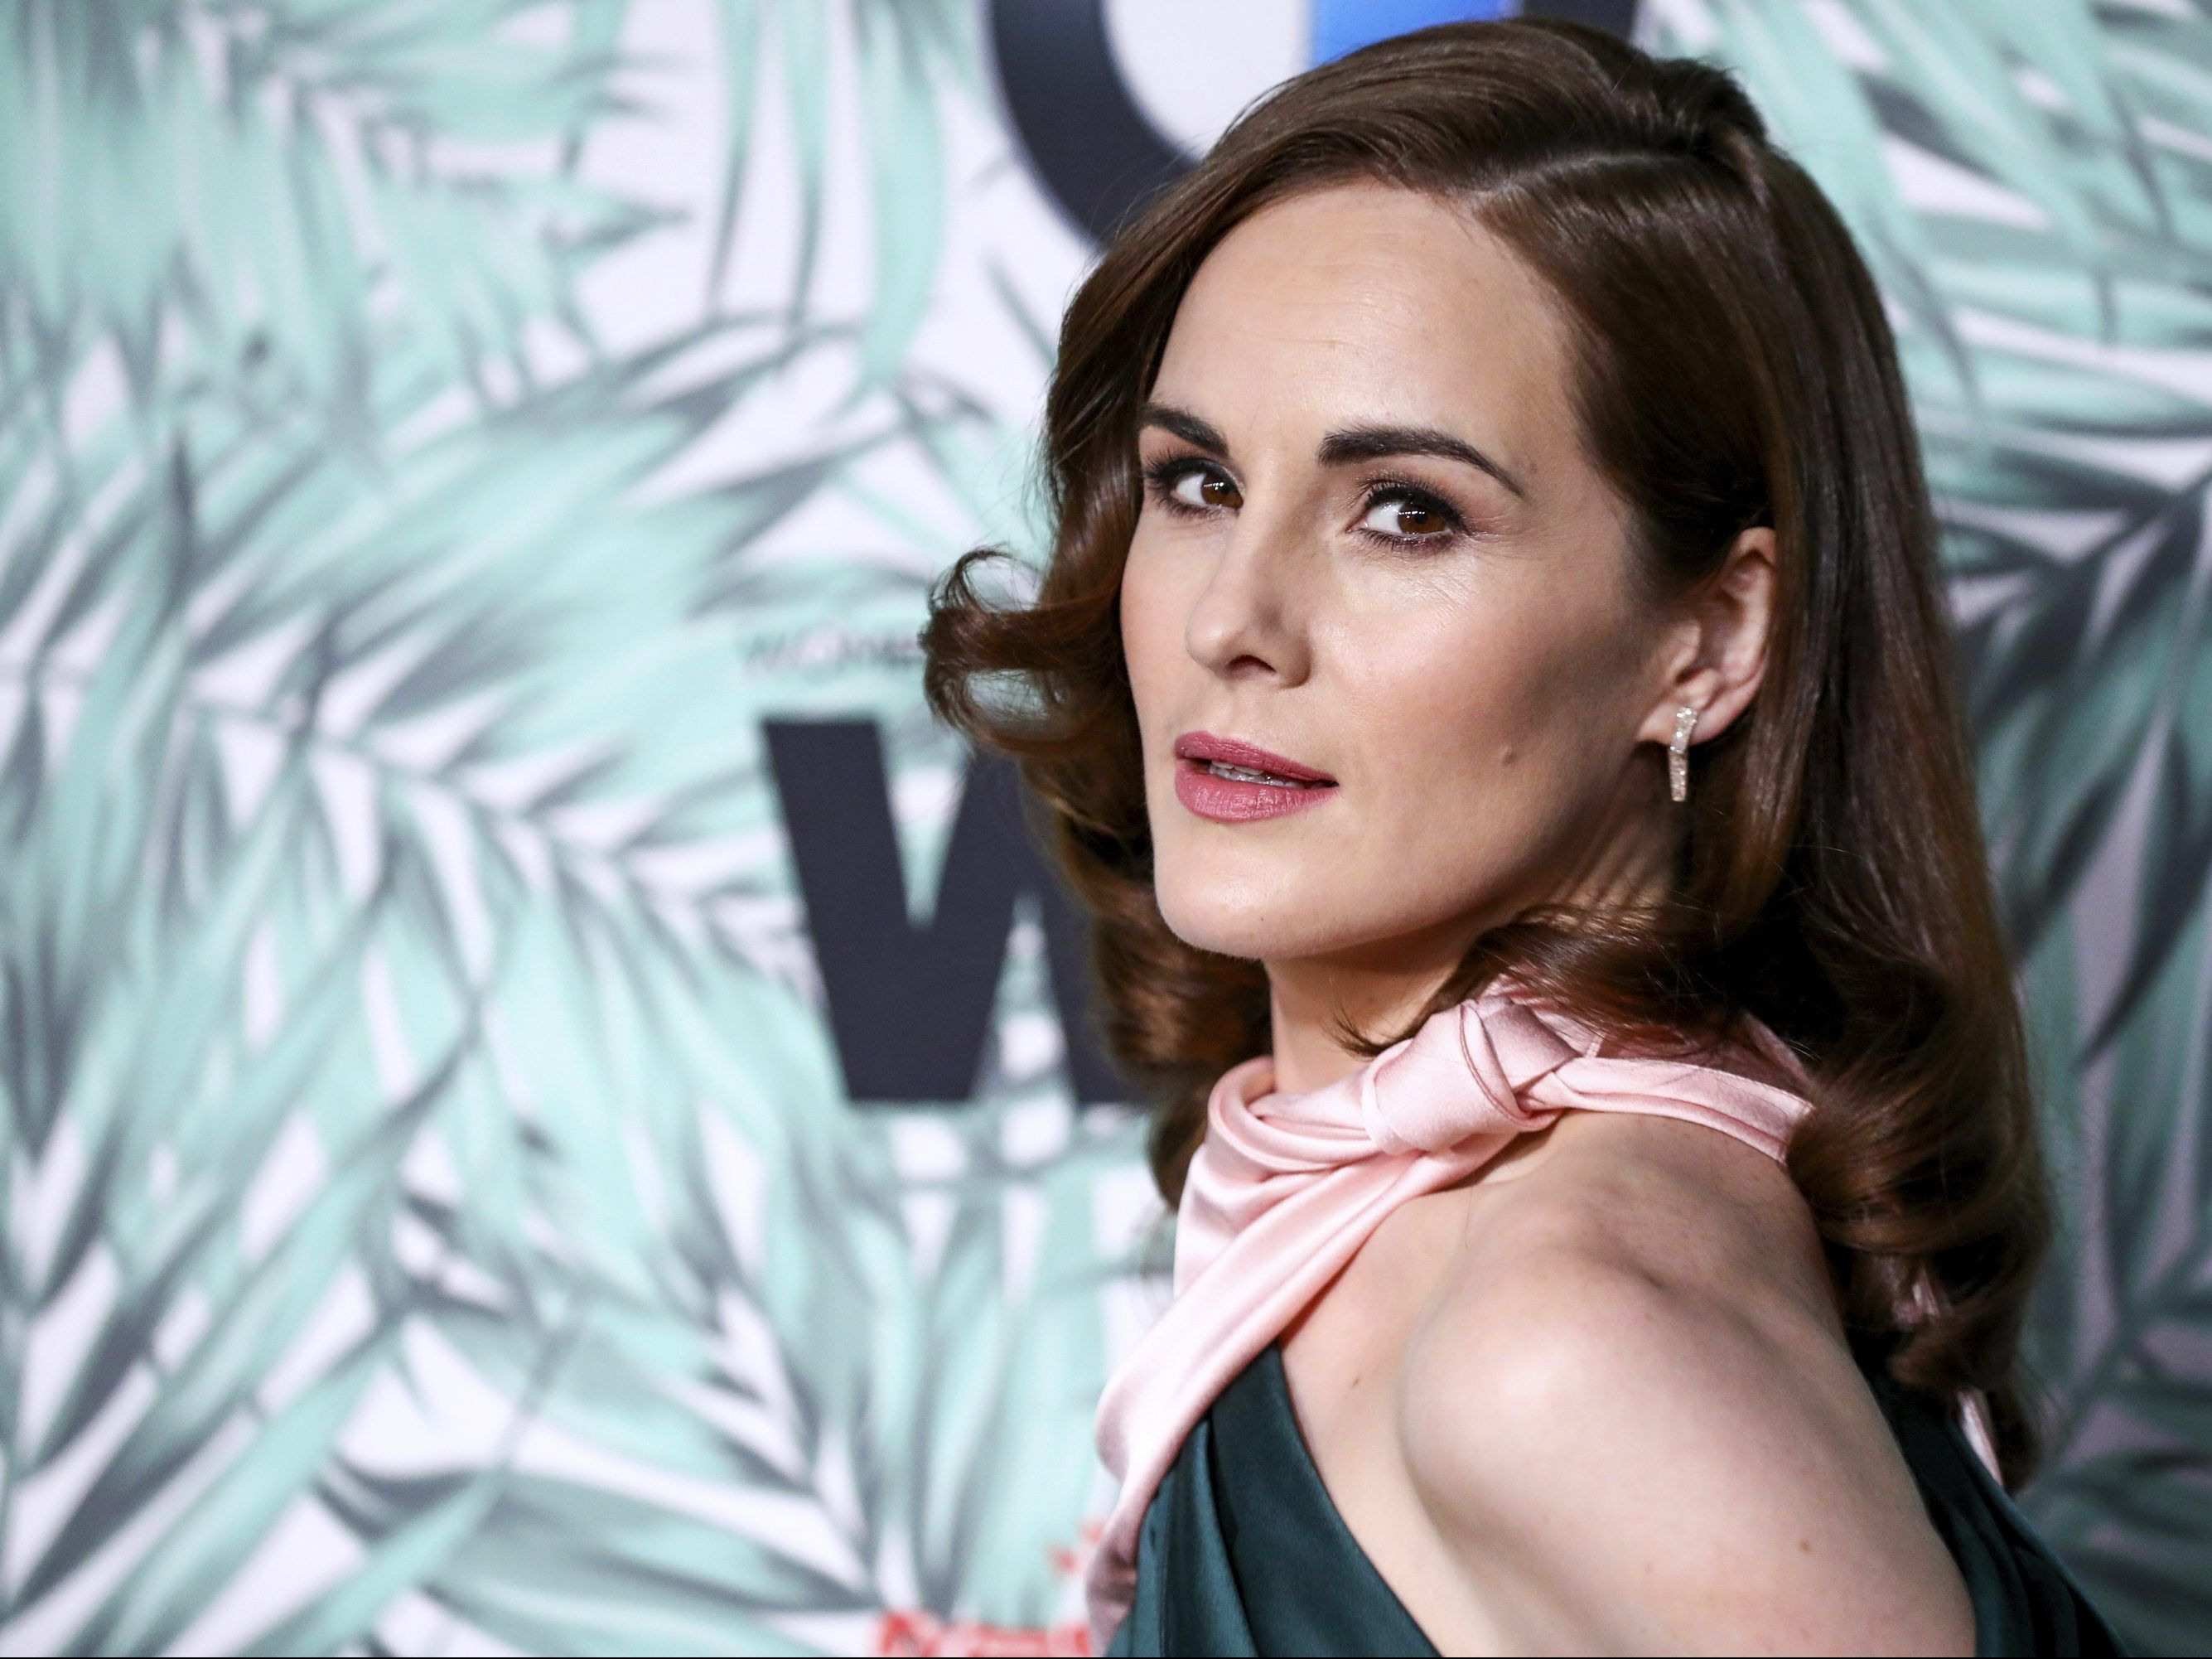 Michelle Dockery shares first image on ’Downton Abbey’ set | Canoe.Com